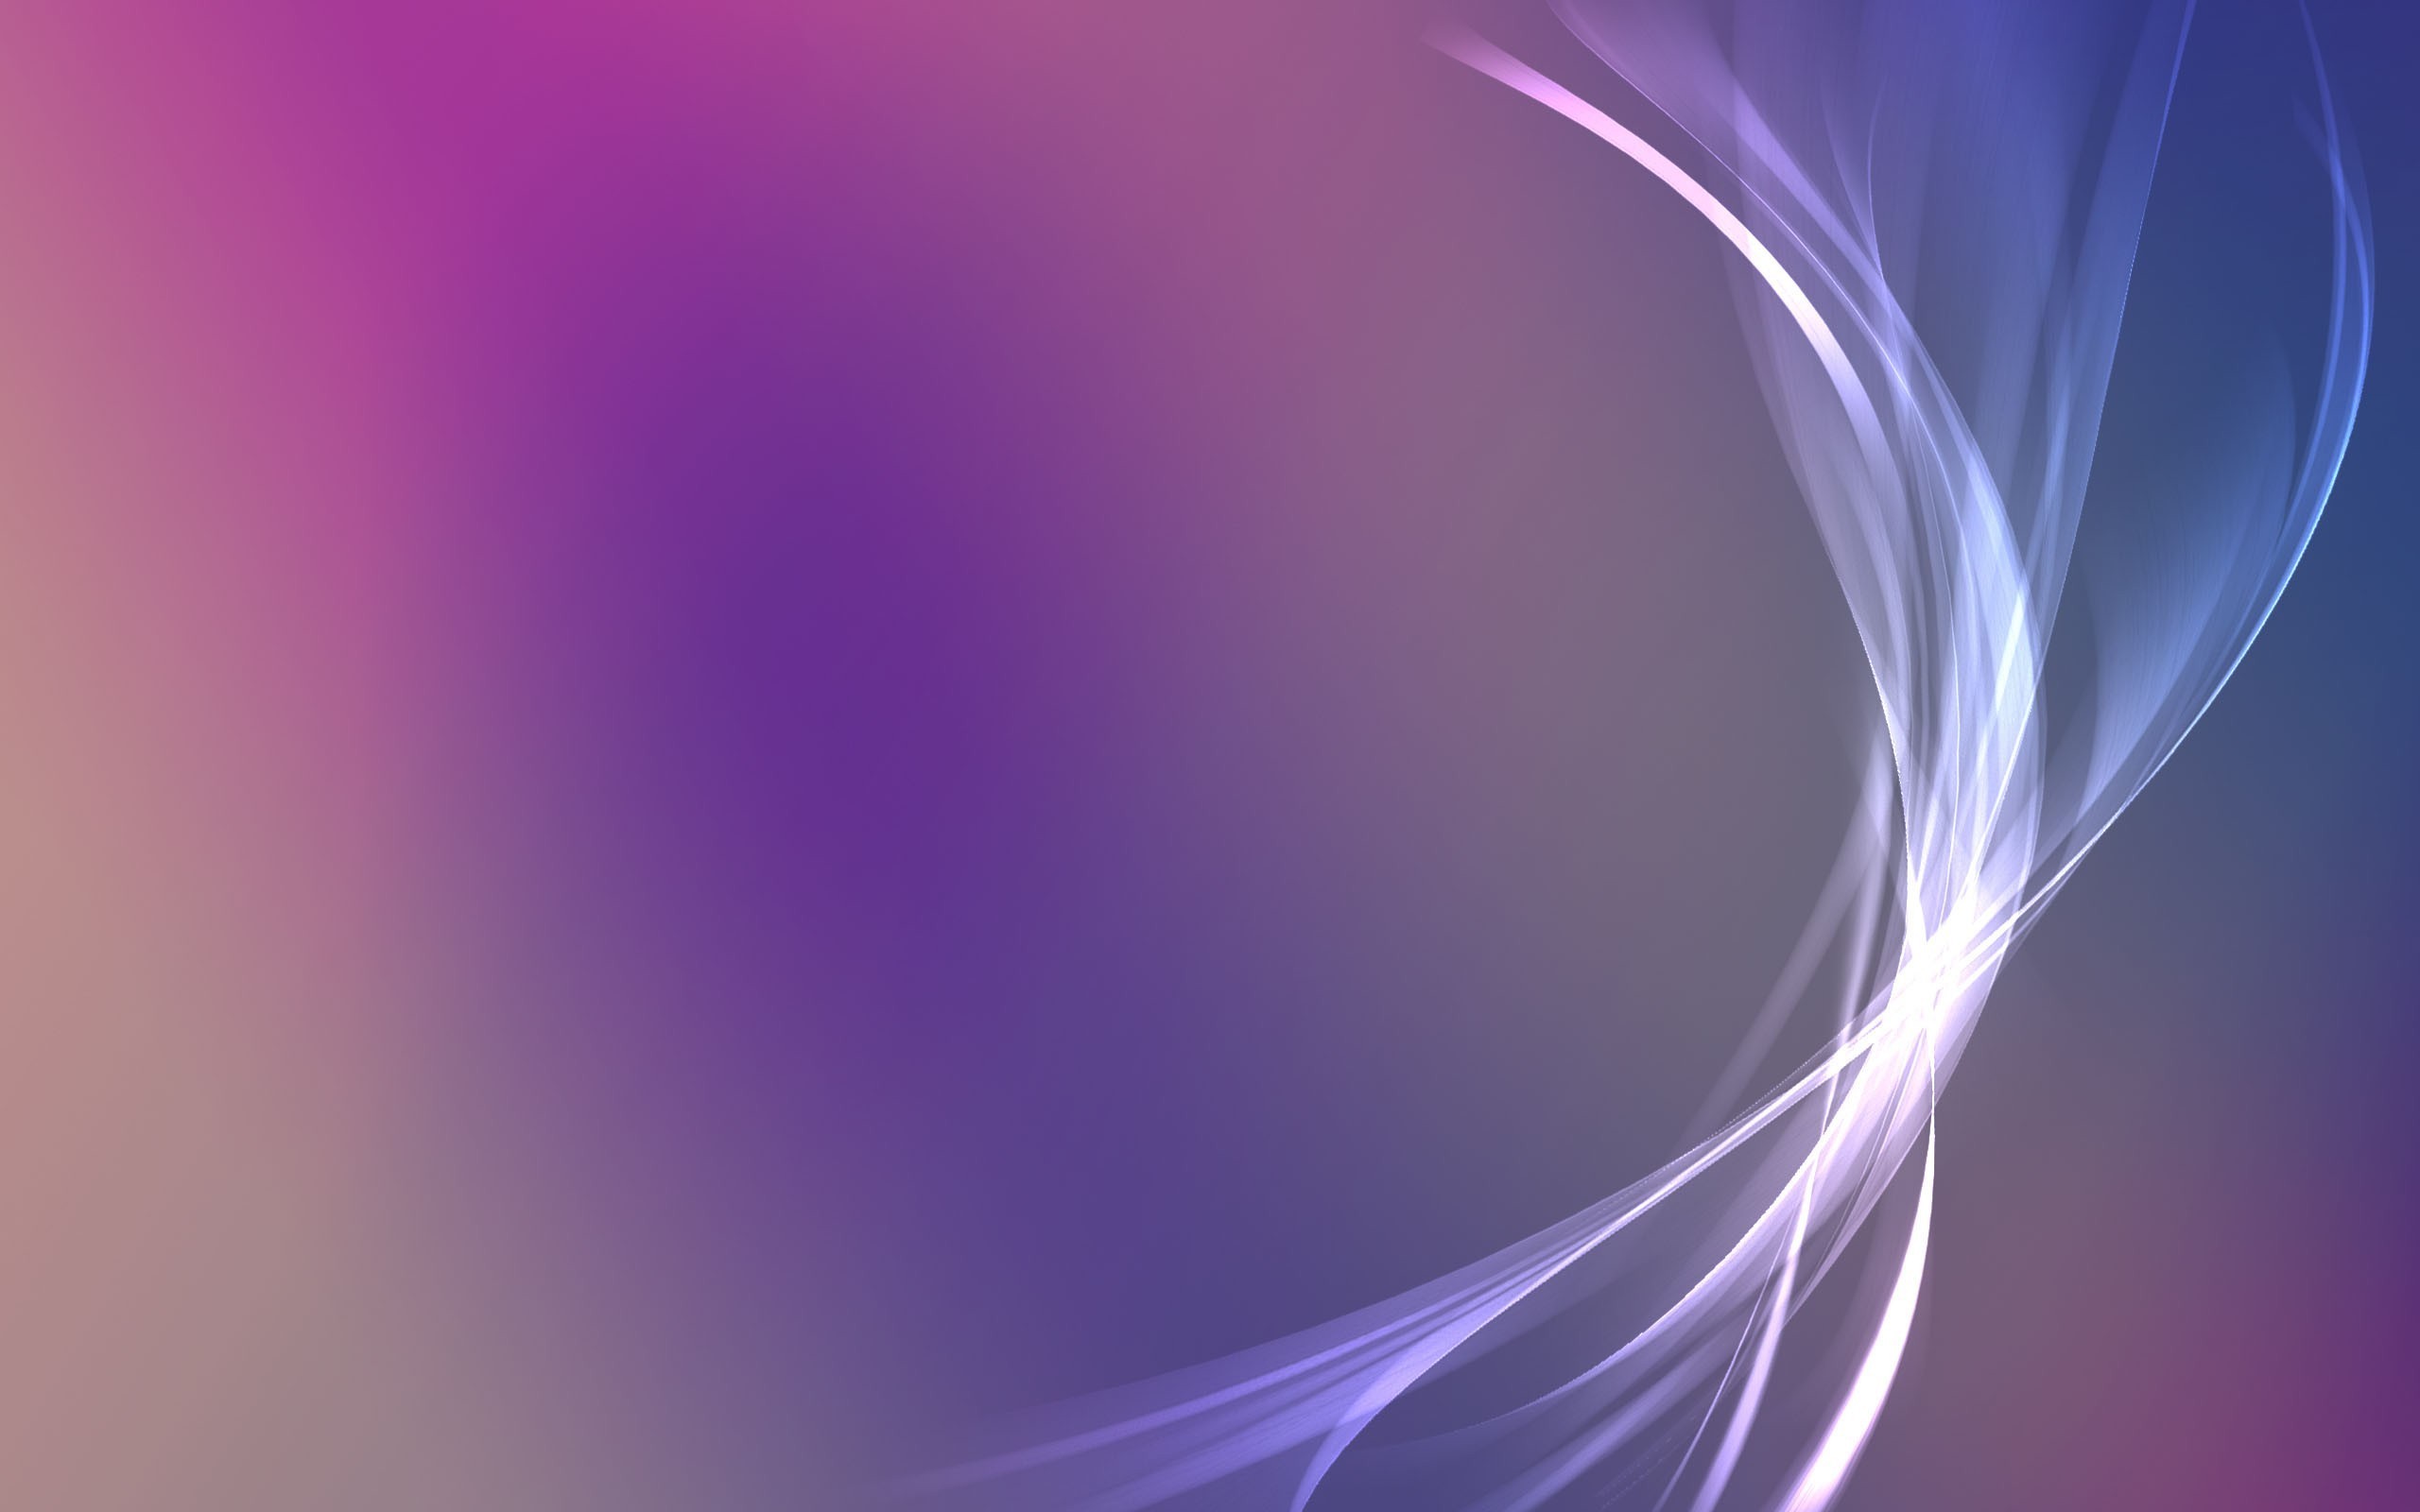 13824 download wallpaper background, abstract, violet screensavers and pictures for free